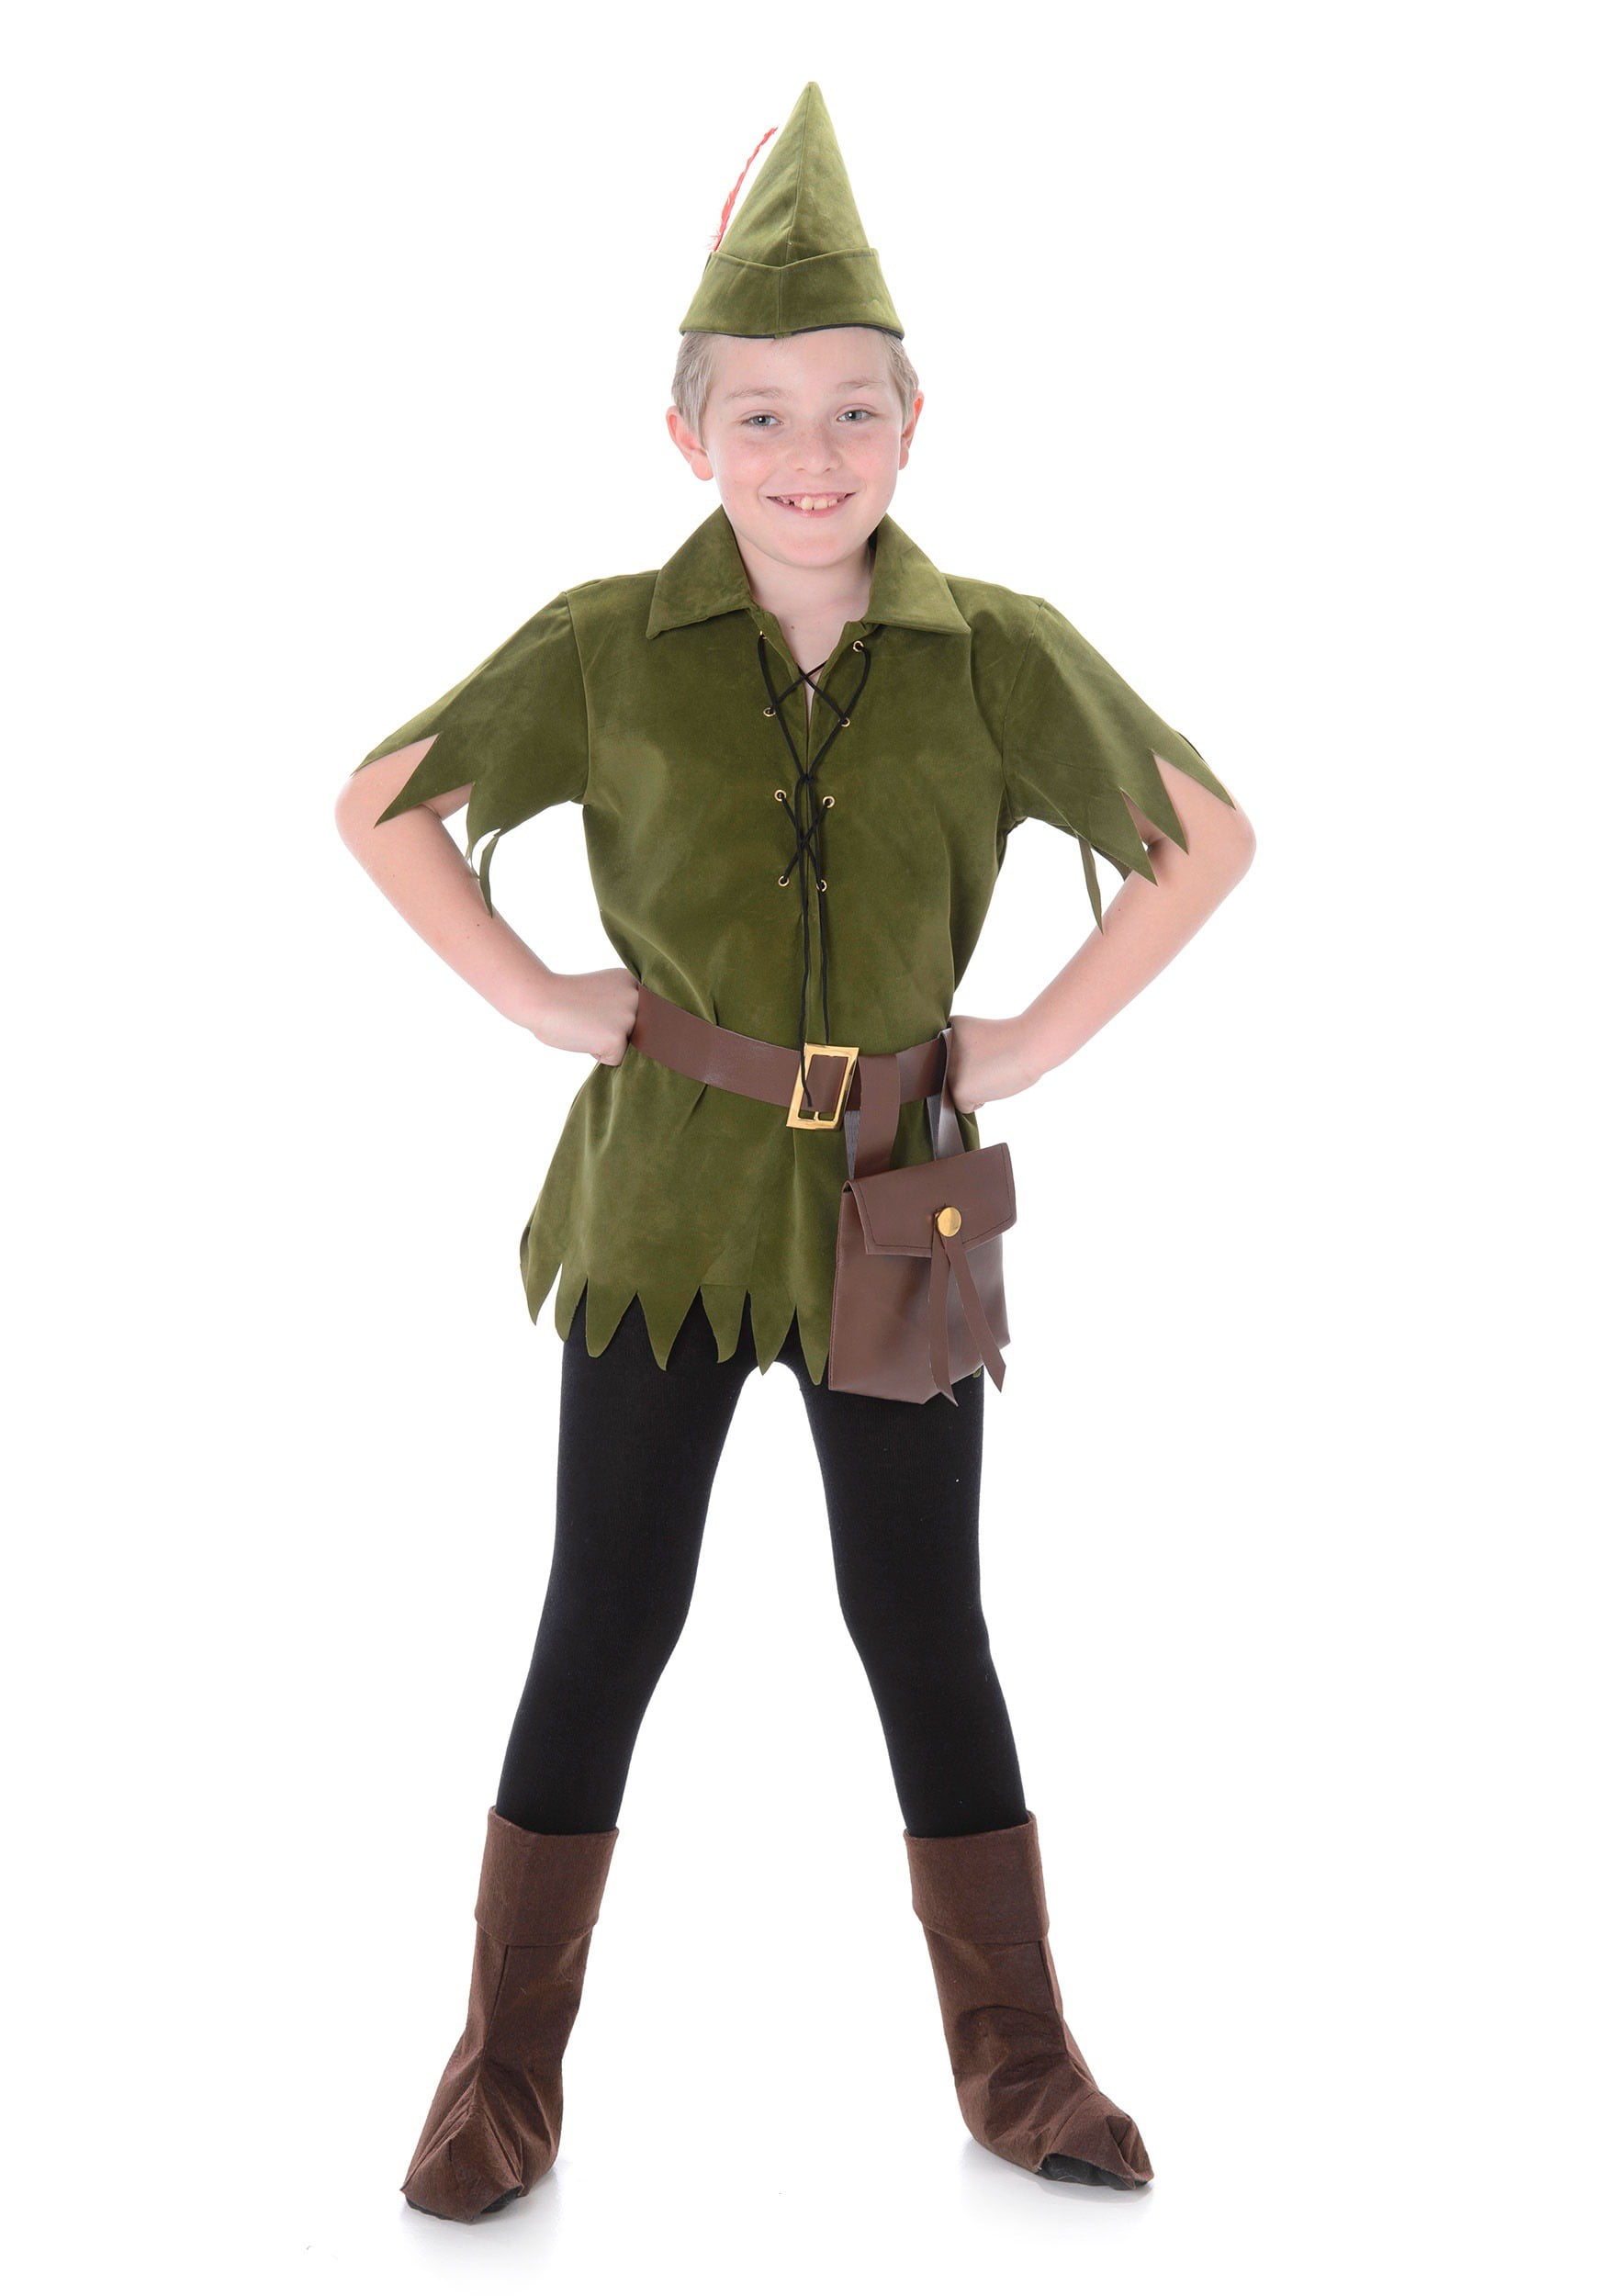 Peter Pan Costume For A Boy